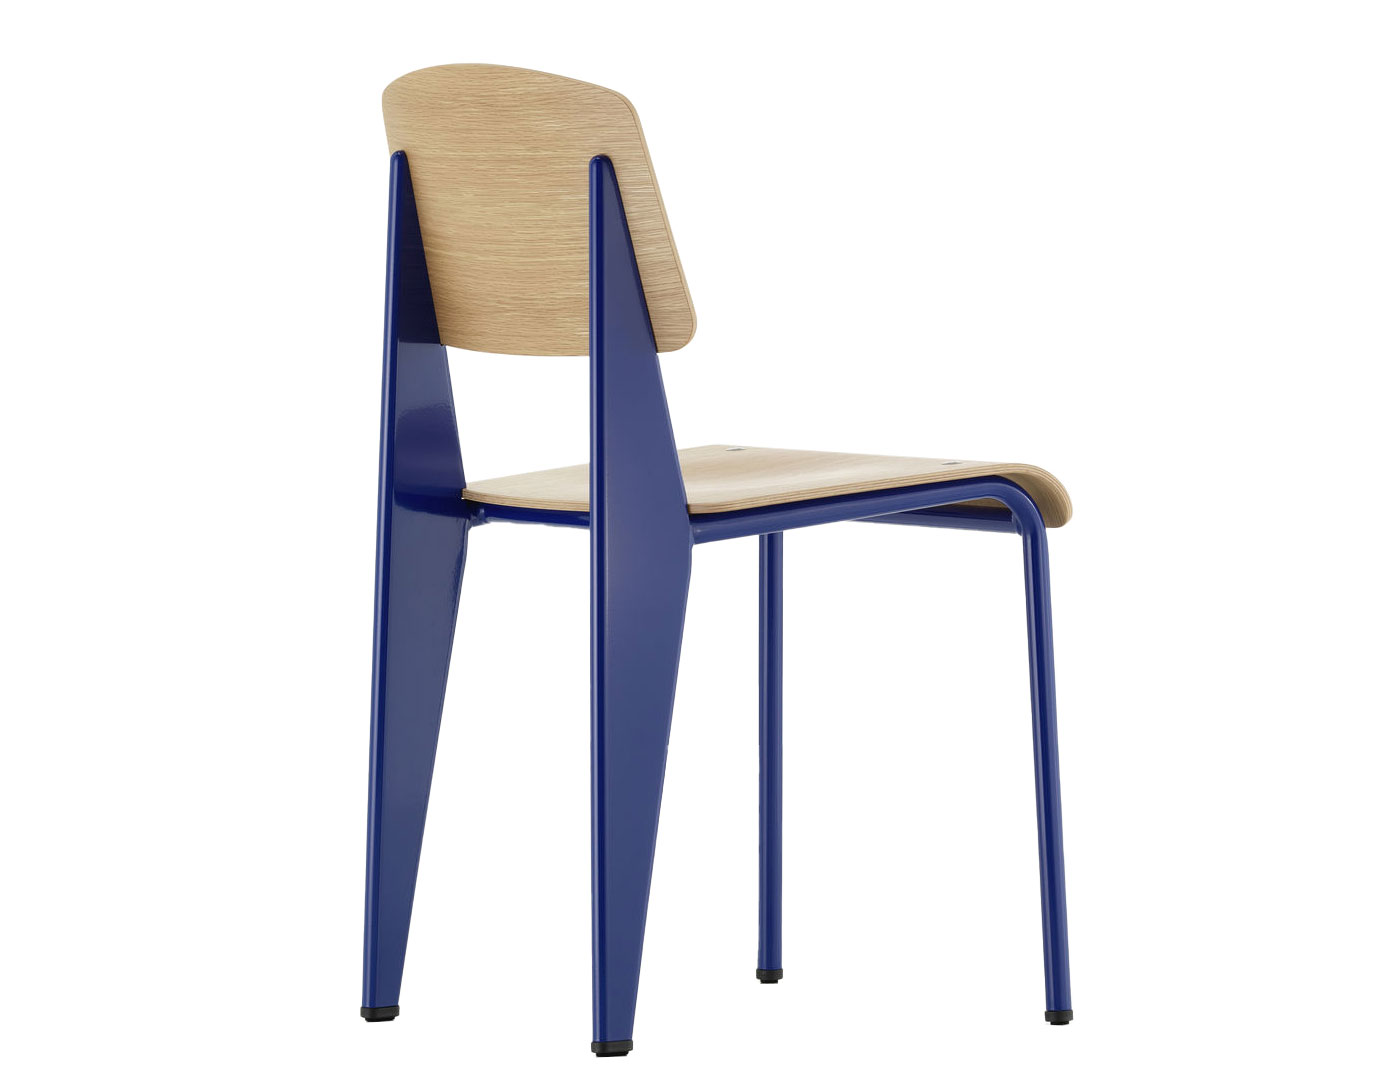 Jean Prouve Standard Chair produced by Vitra | hive